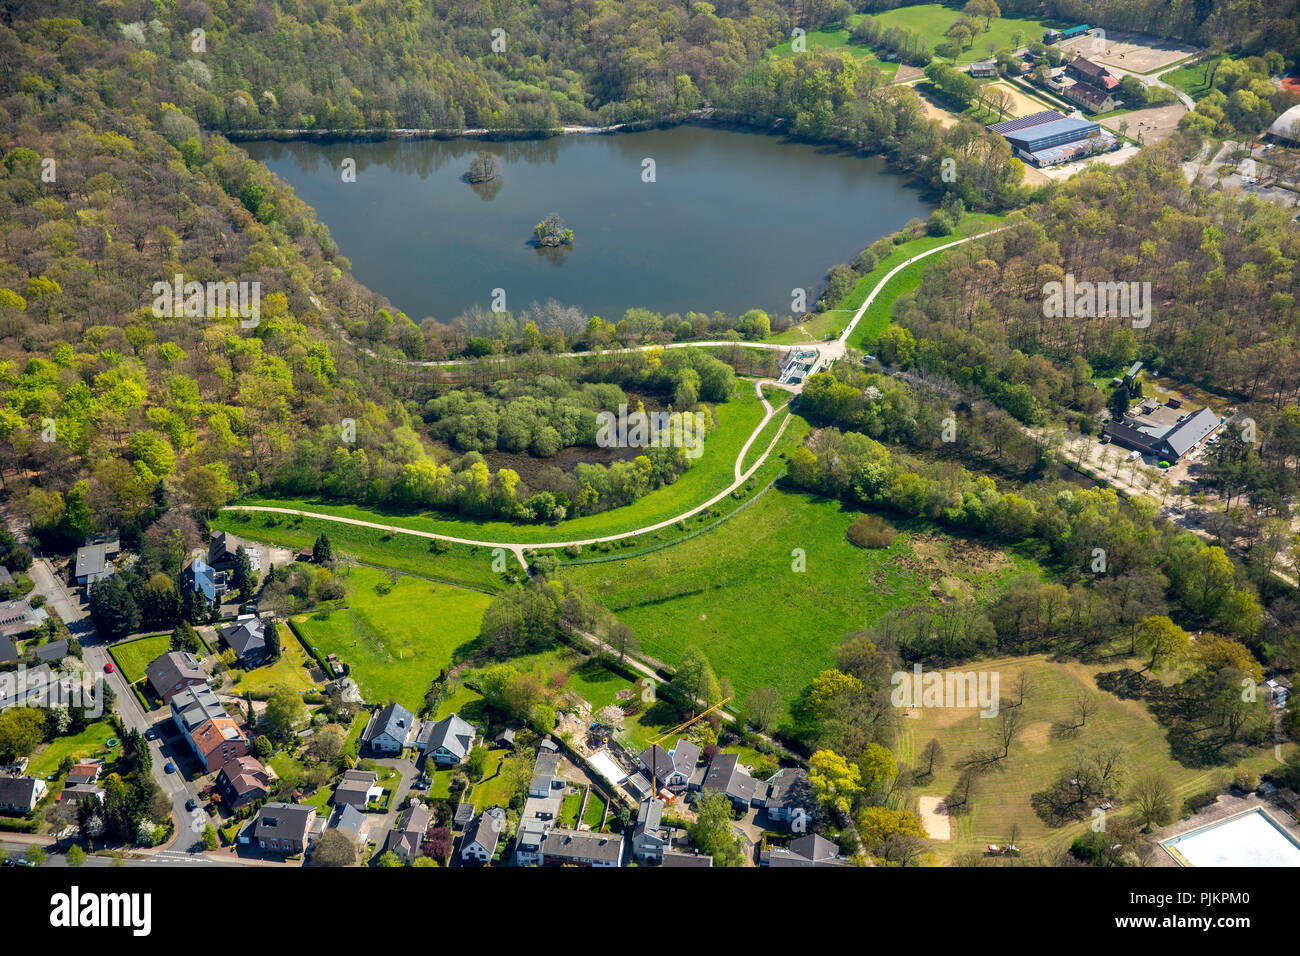 Rotbachsee weir in Dinslaken, Lippeverband, nature conservation, water management, Dinslaken, Ruhr area, North Rhine-Westphalia, Germany Stock Photo